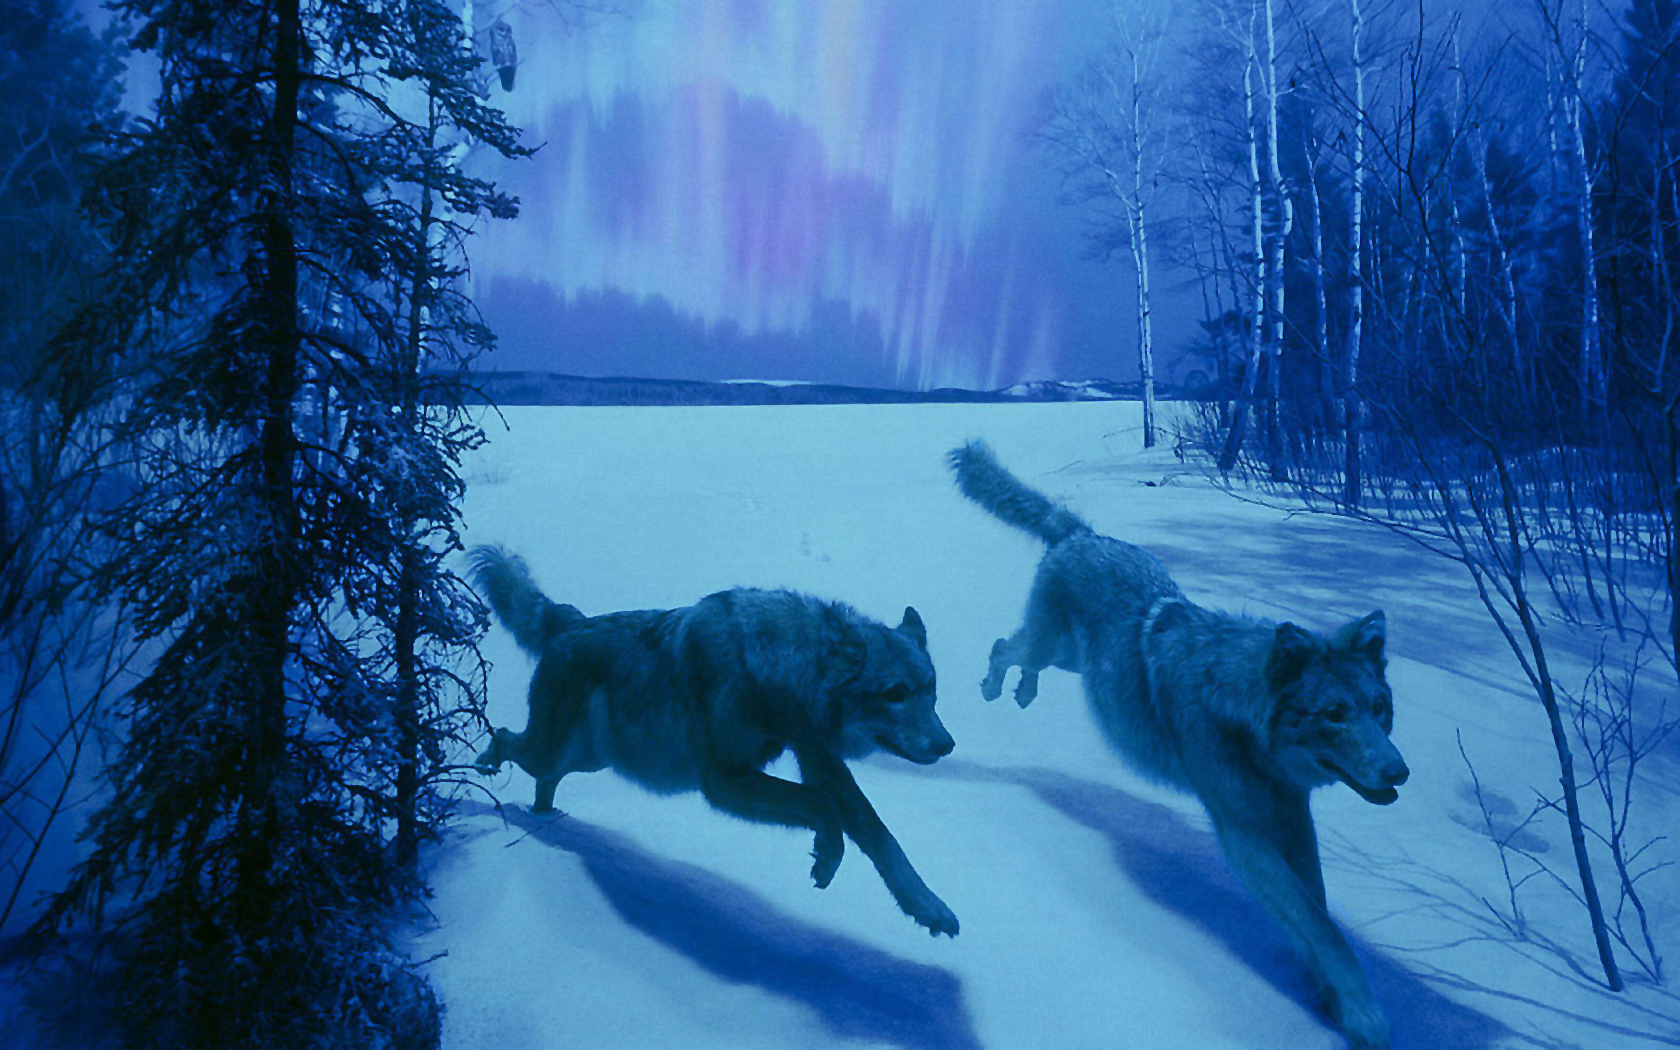 The Hunt: Majestic wolf standing in nature, embodying the primal spirit of the animal kingdom.